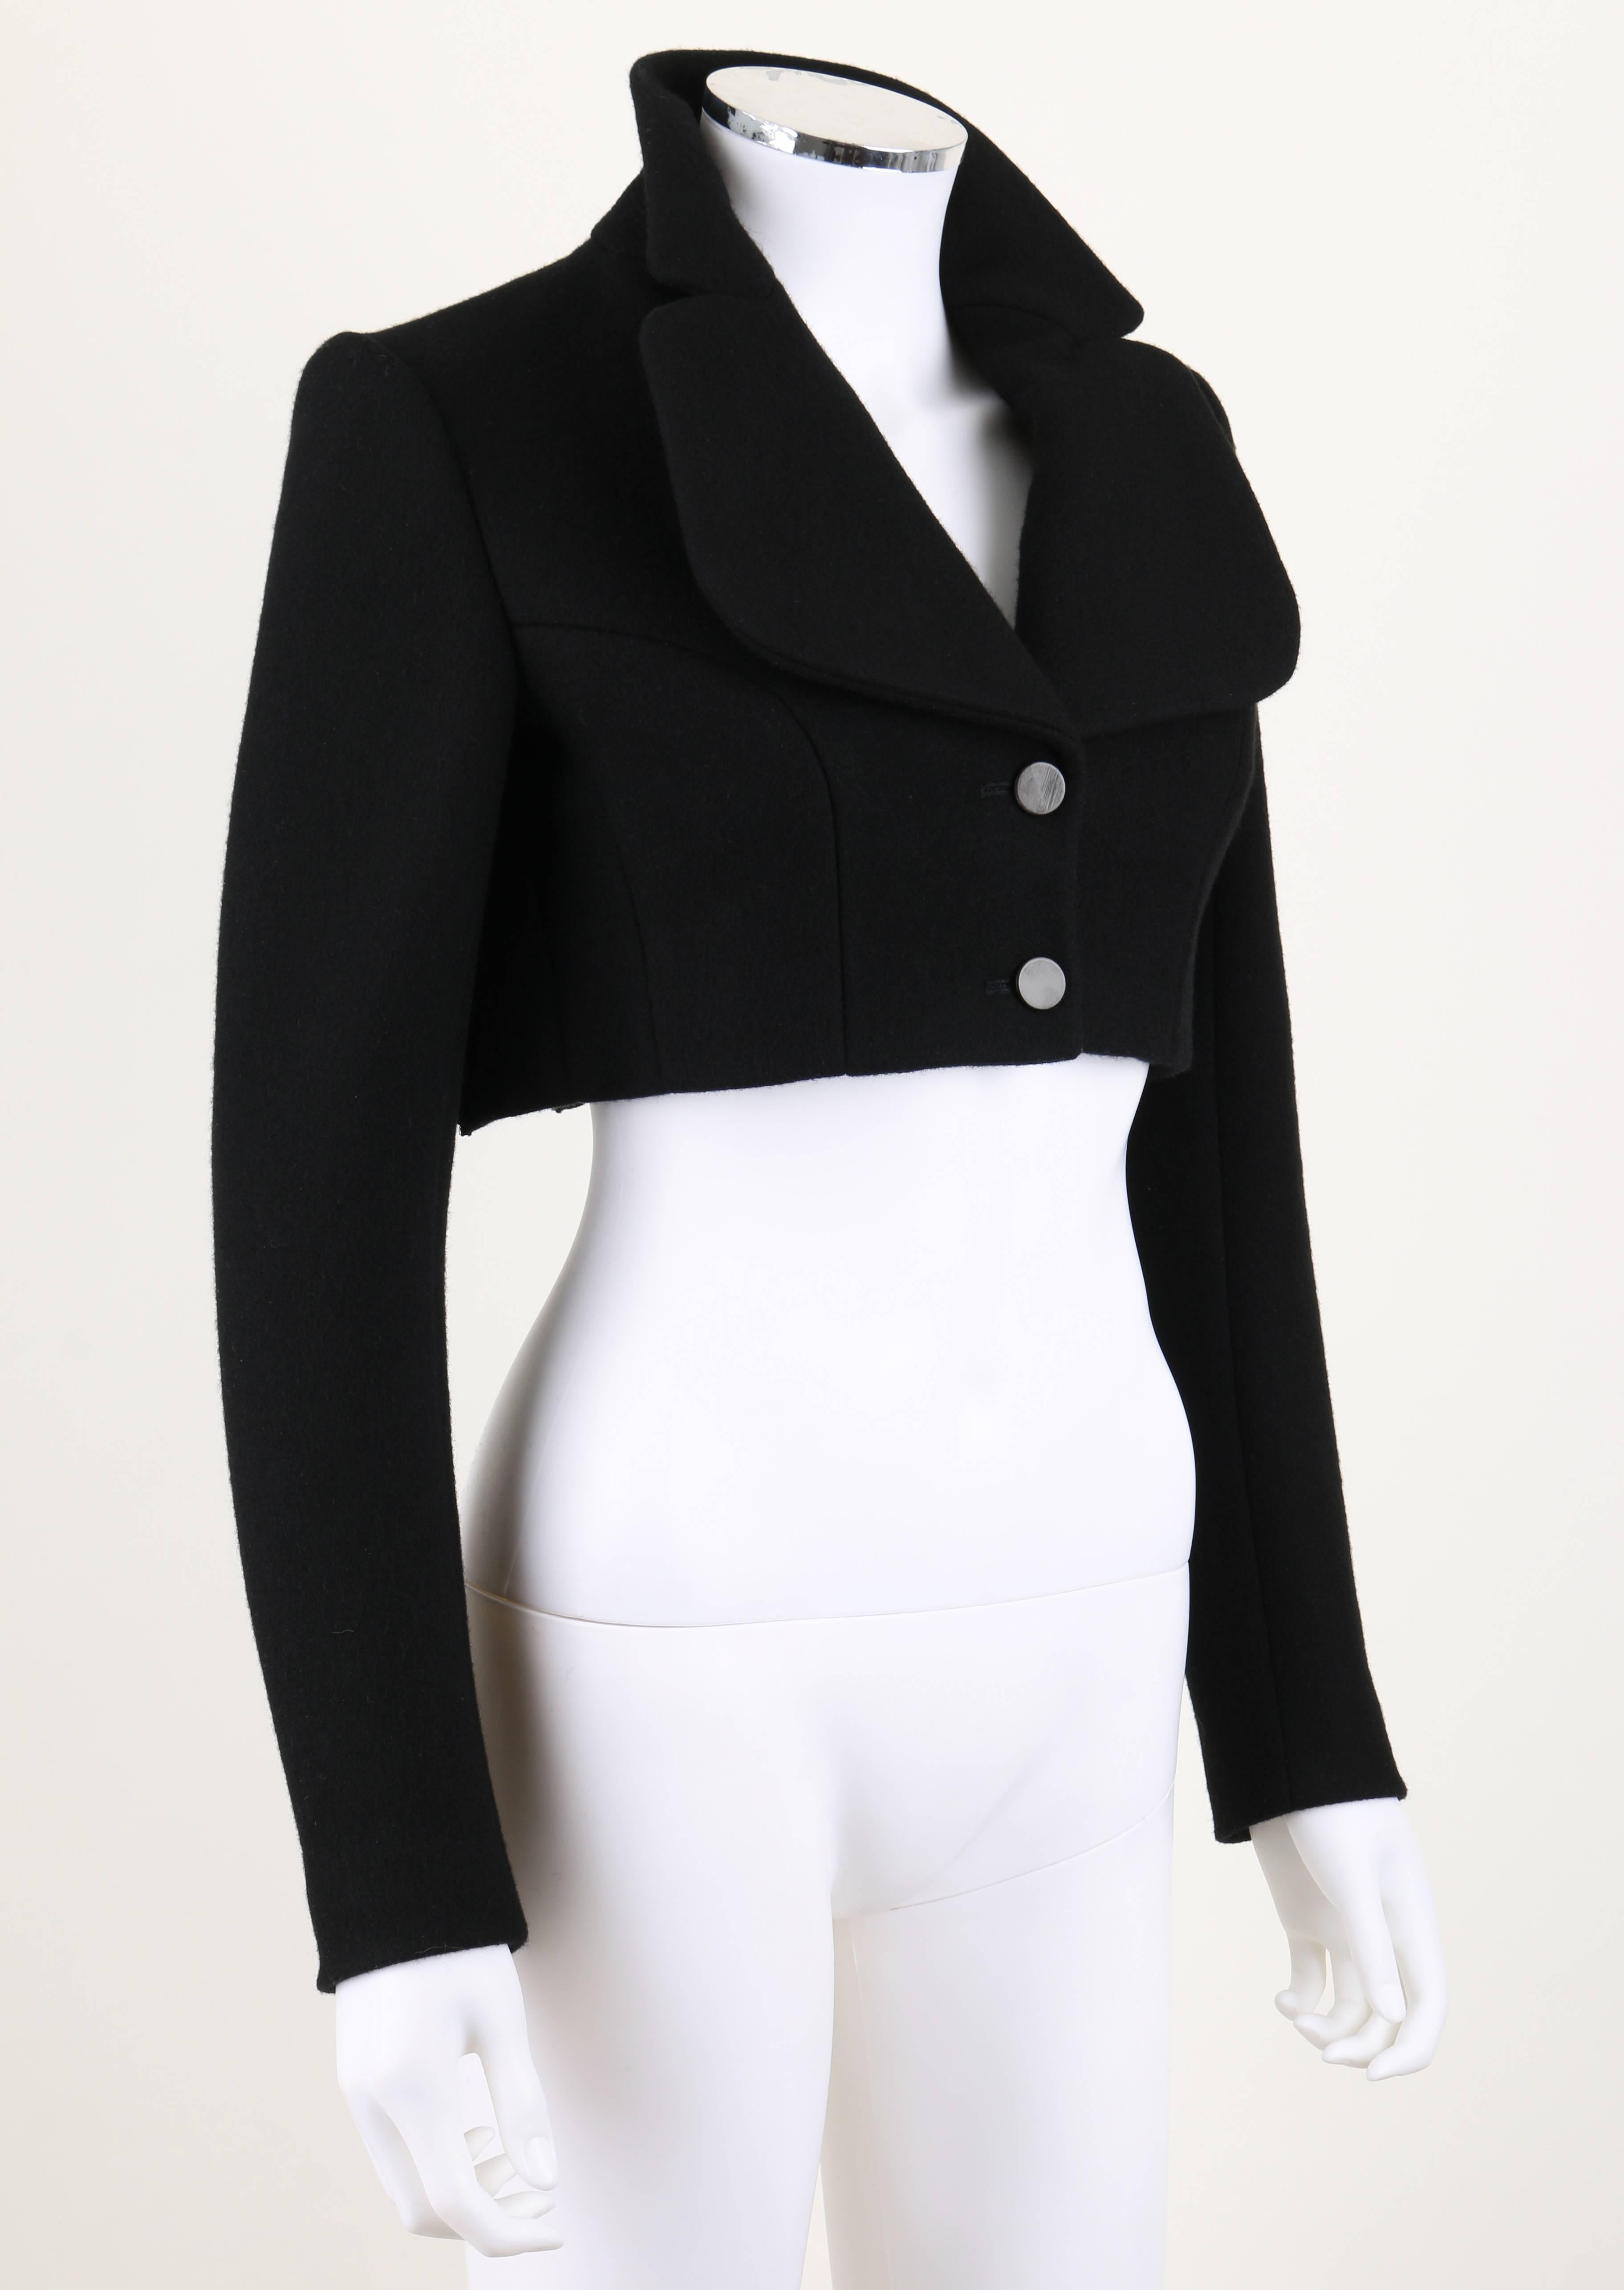 Alaia Paris black wool/cashmere cropped jacket. Full pleated back. Large lapel. Two button closure at front. Interior lacing corset-like lining at back. Fully lined.
Marked Fabric Content: 